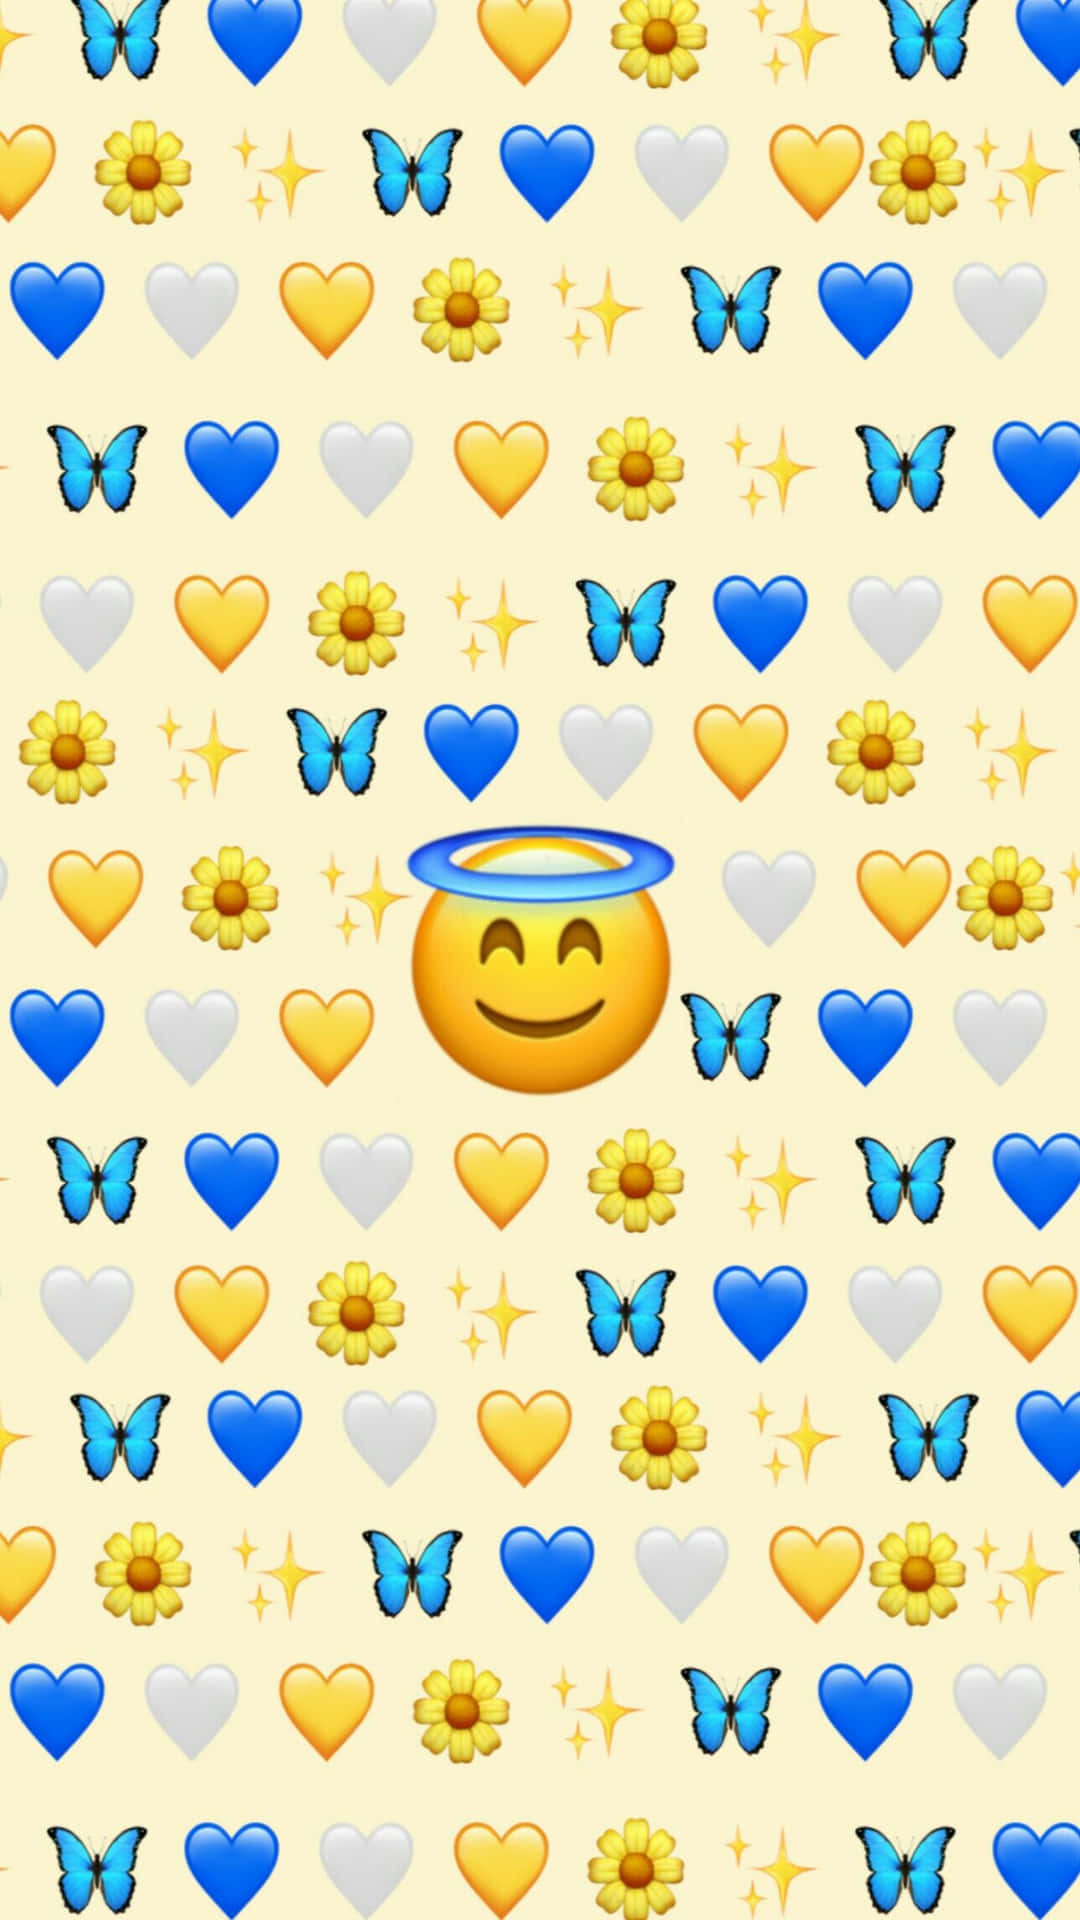 Download Show your emotions with this cute emoji Wallpaper